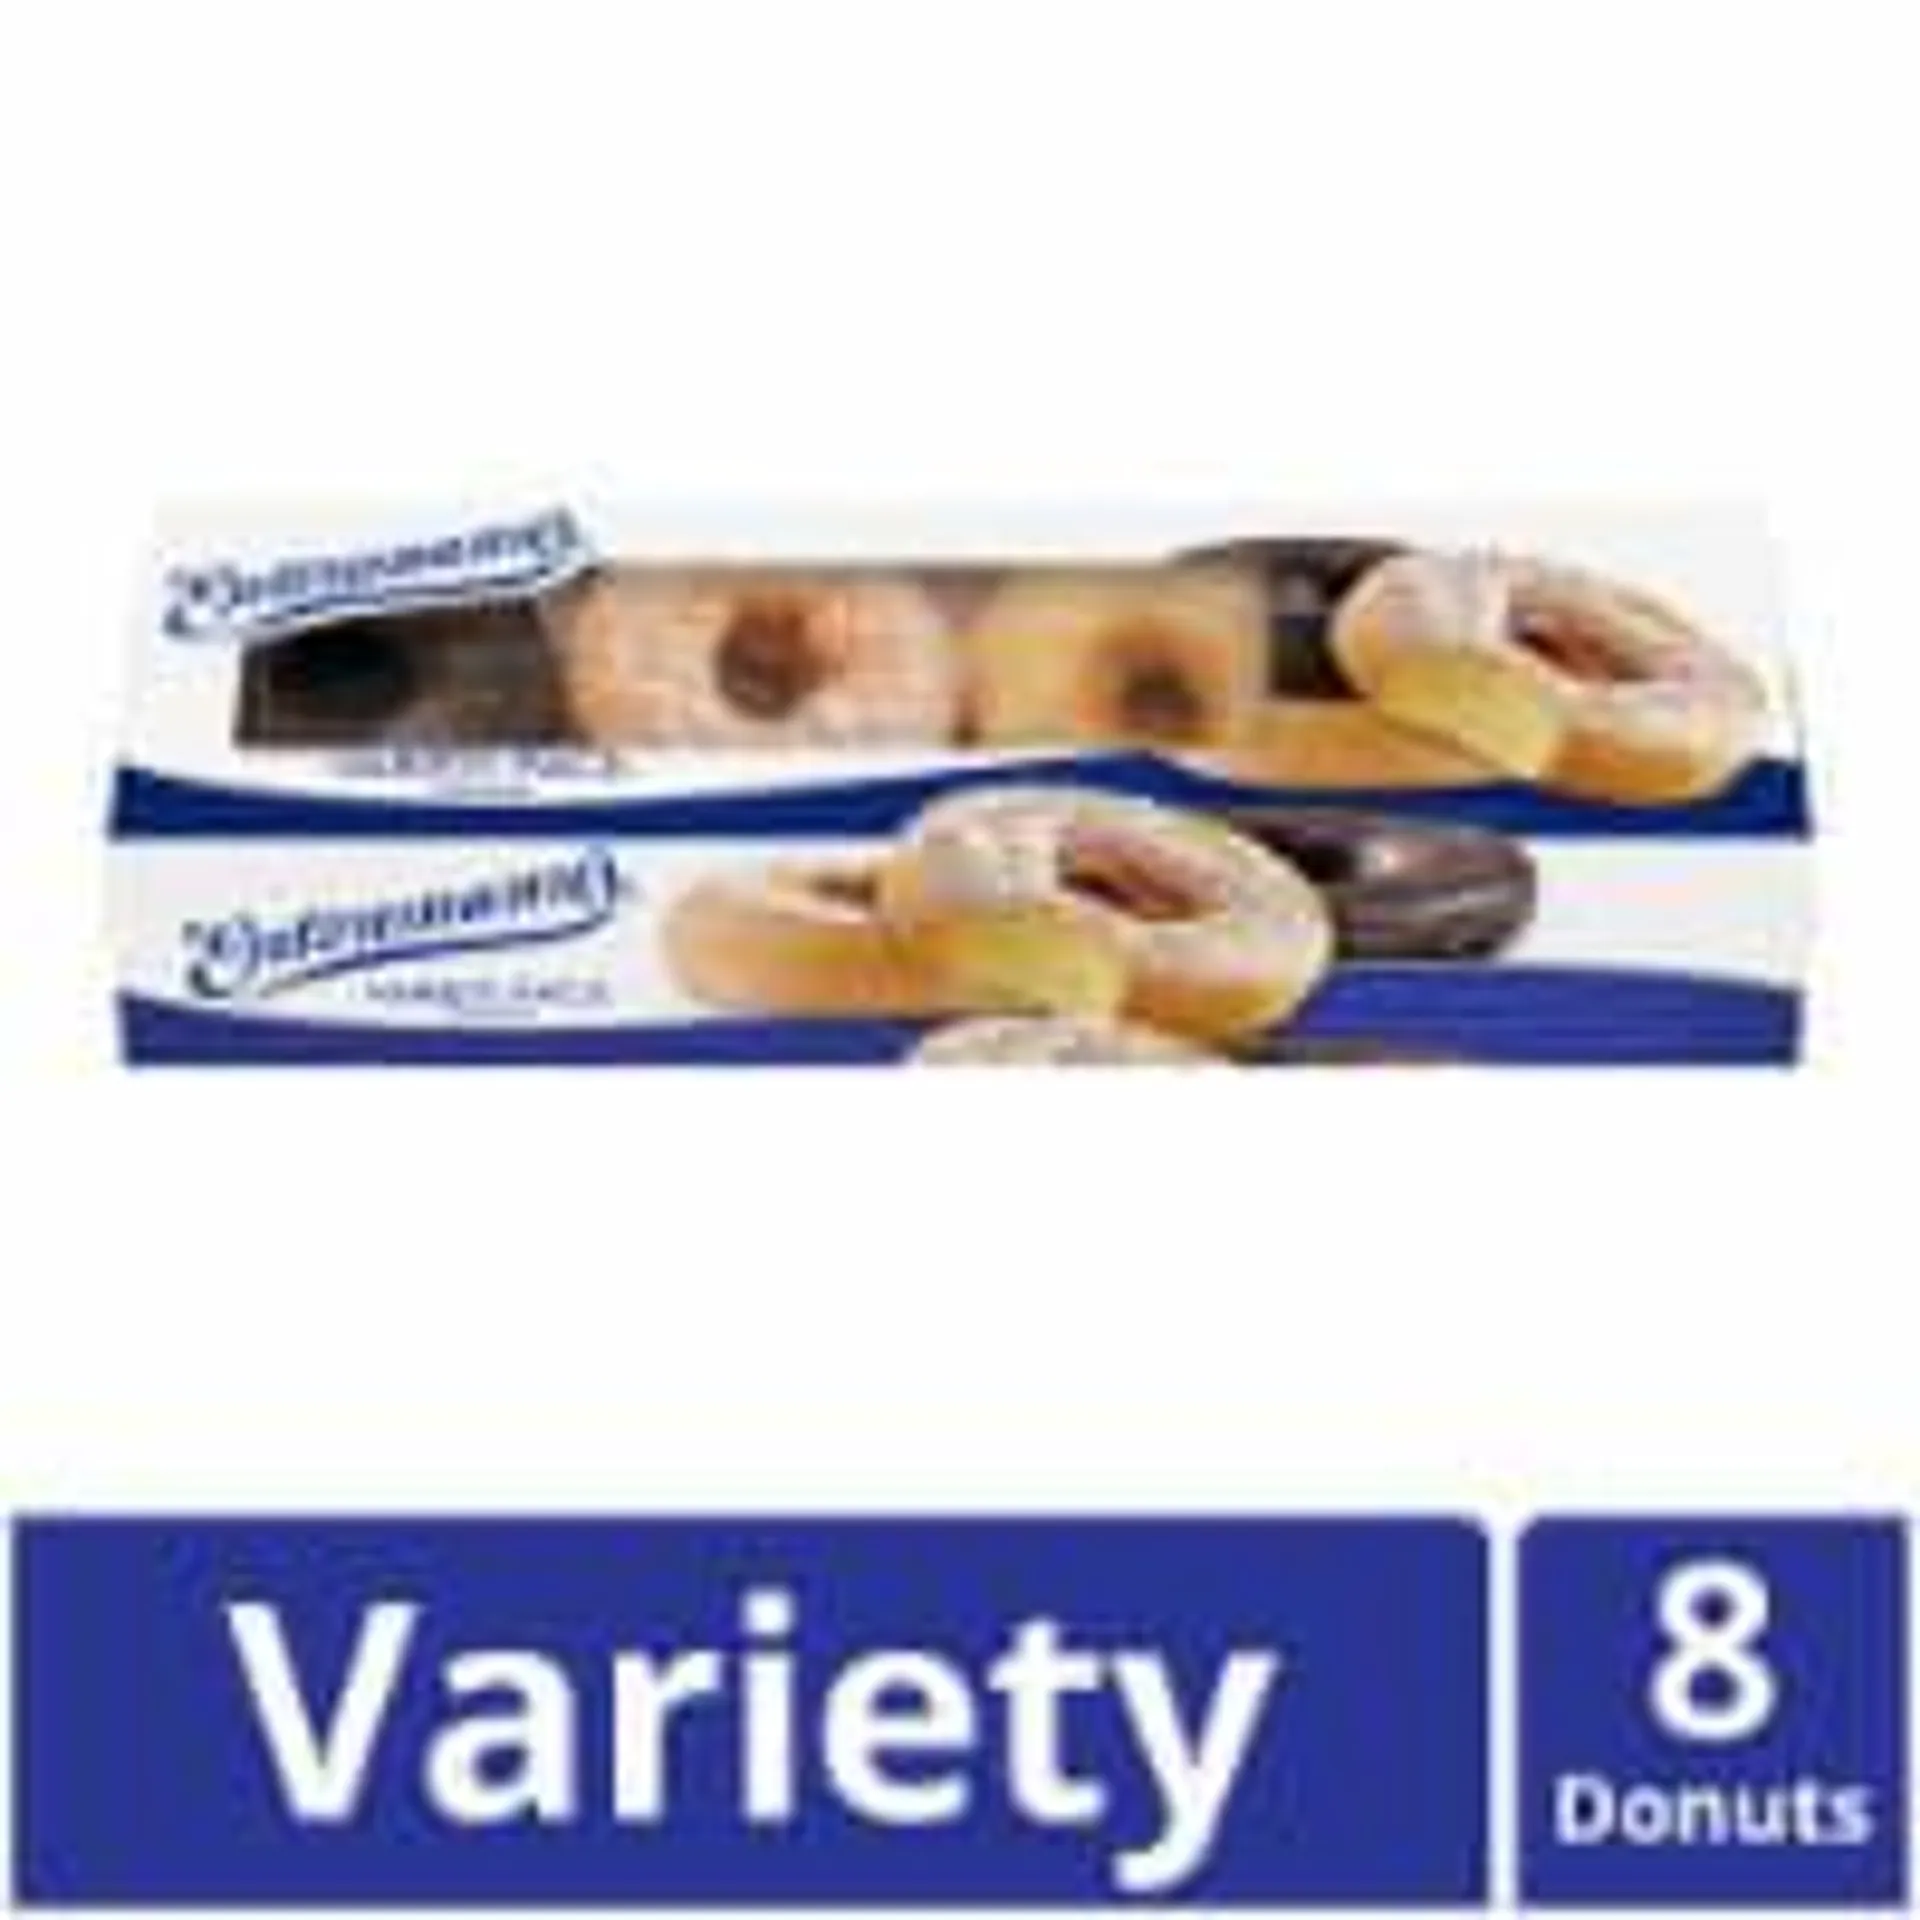 Entenmann's Variety Pack Donuts